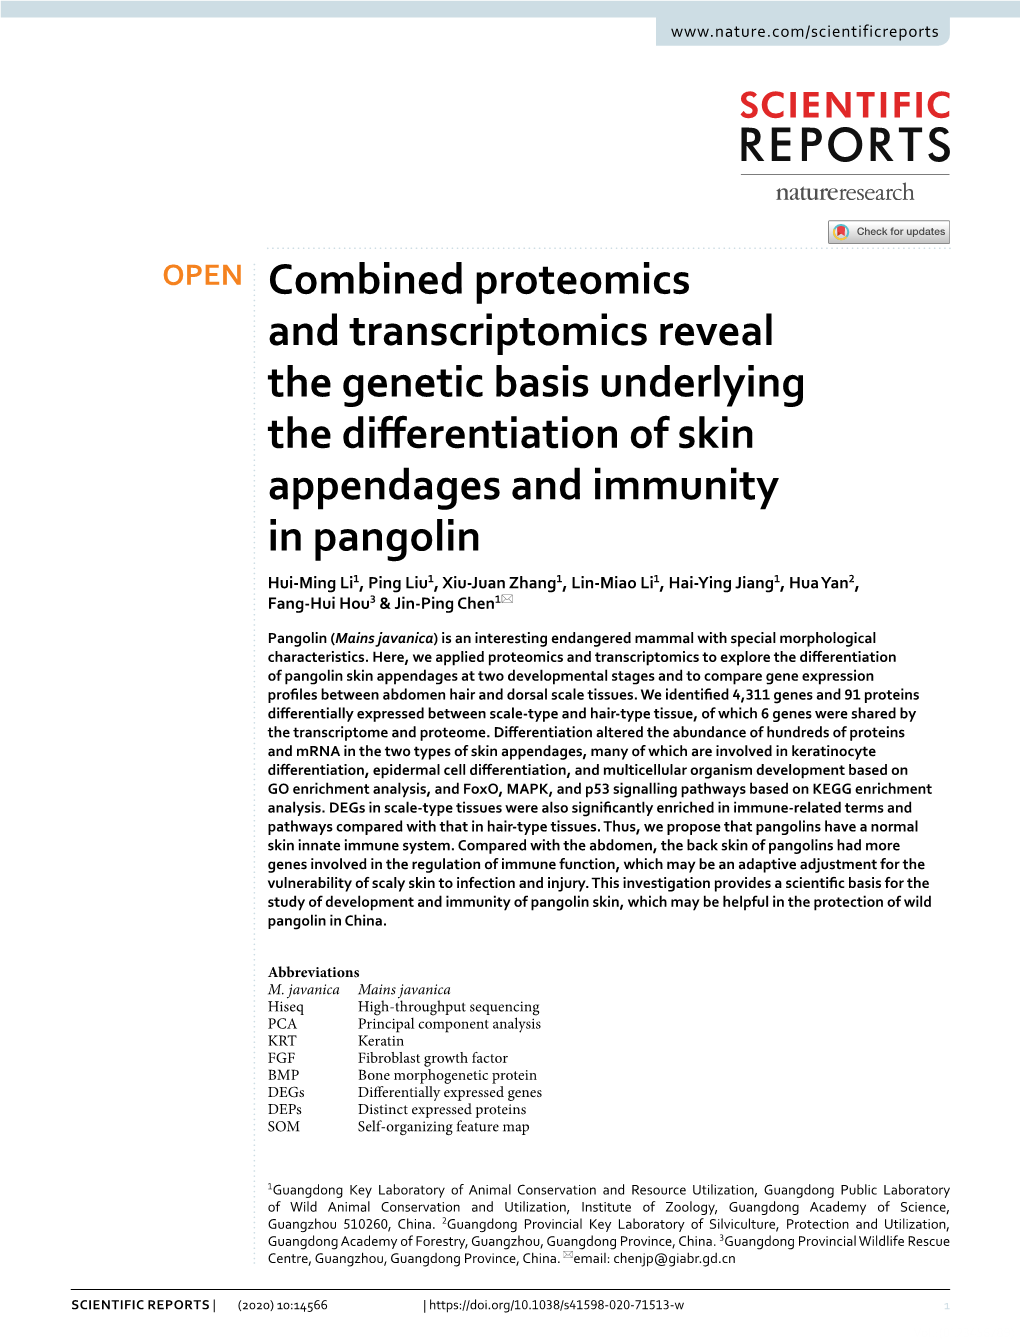 Combined Proteomics and Transcriptomics Reveal the Genetic